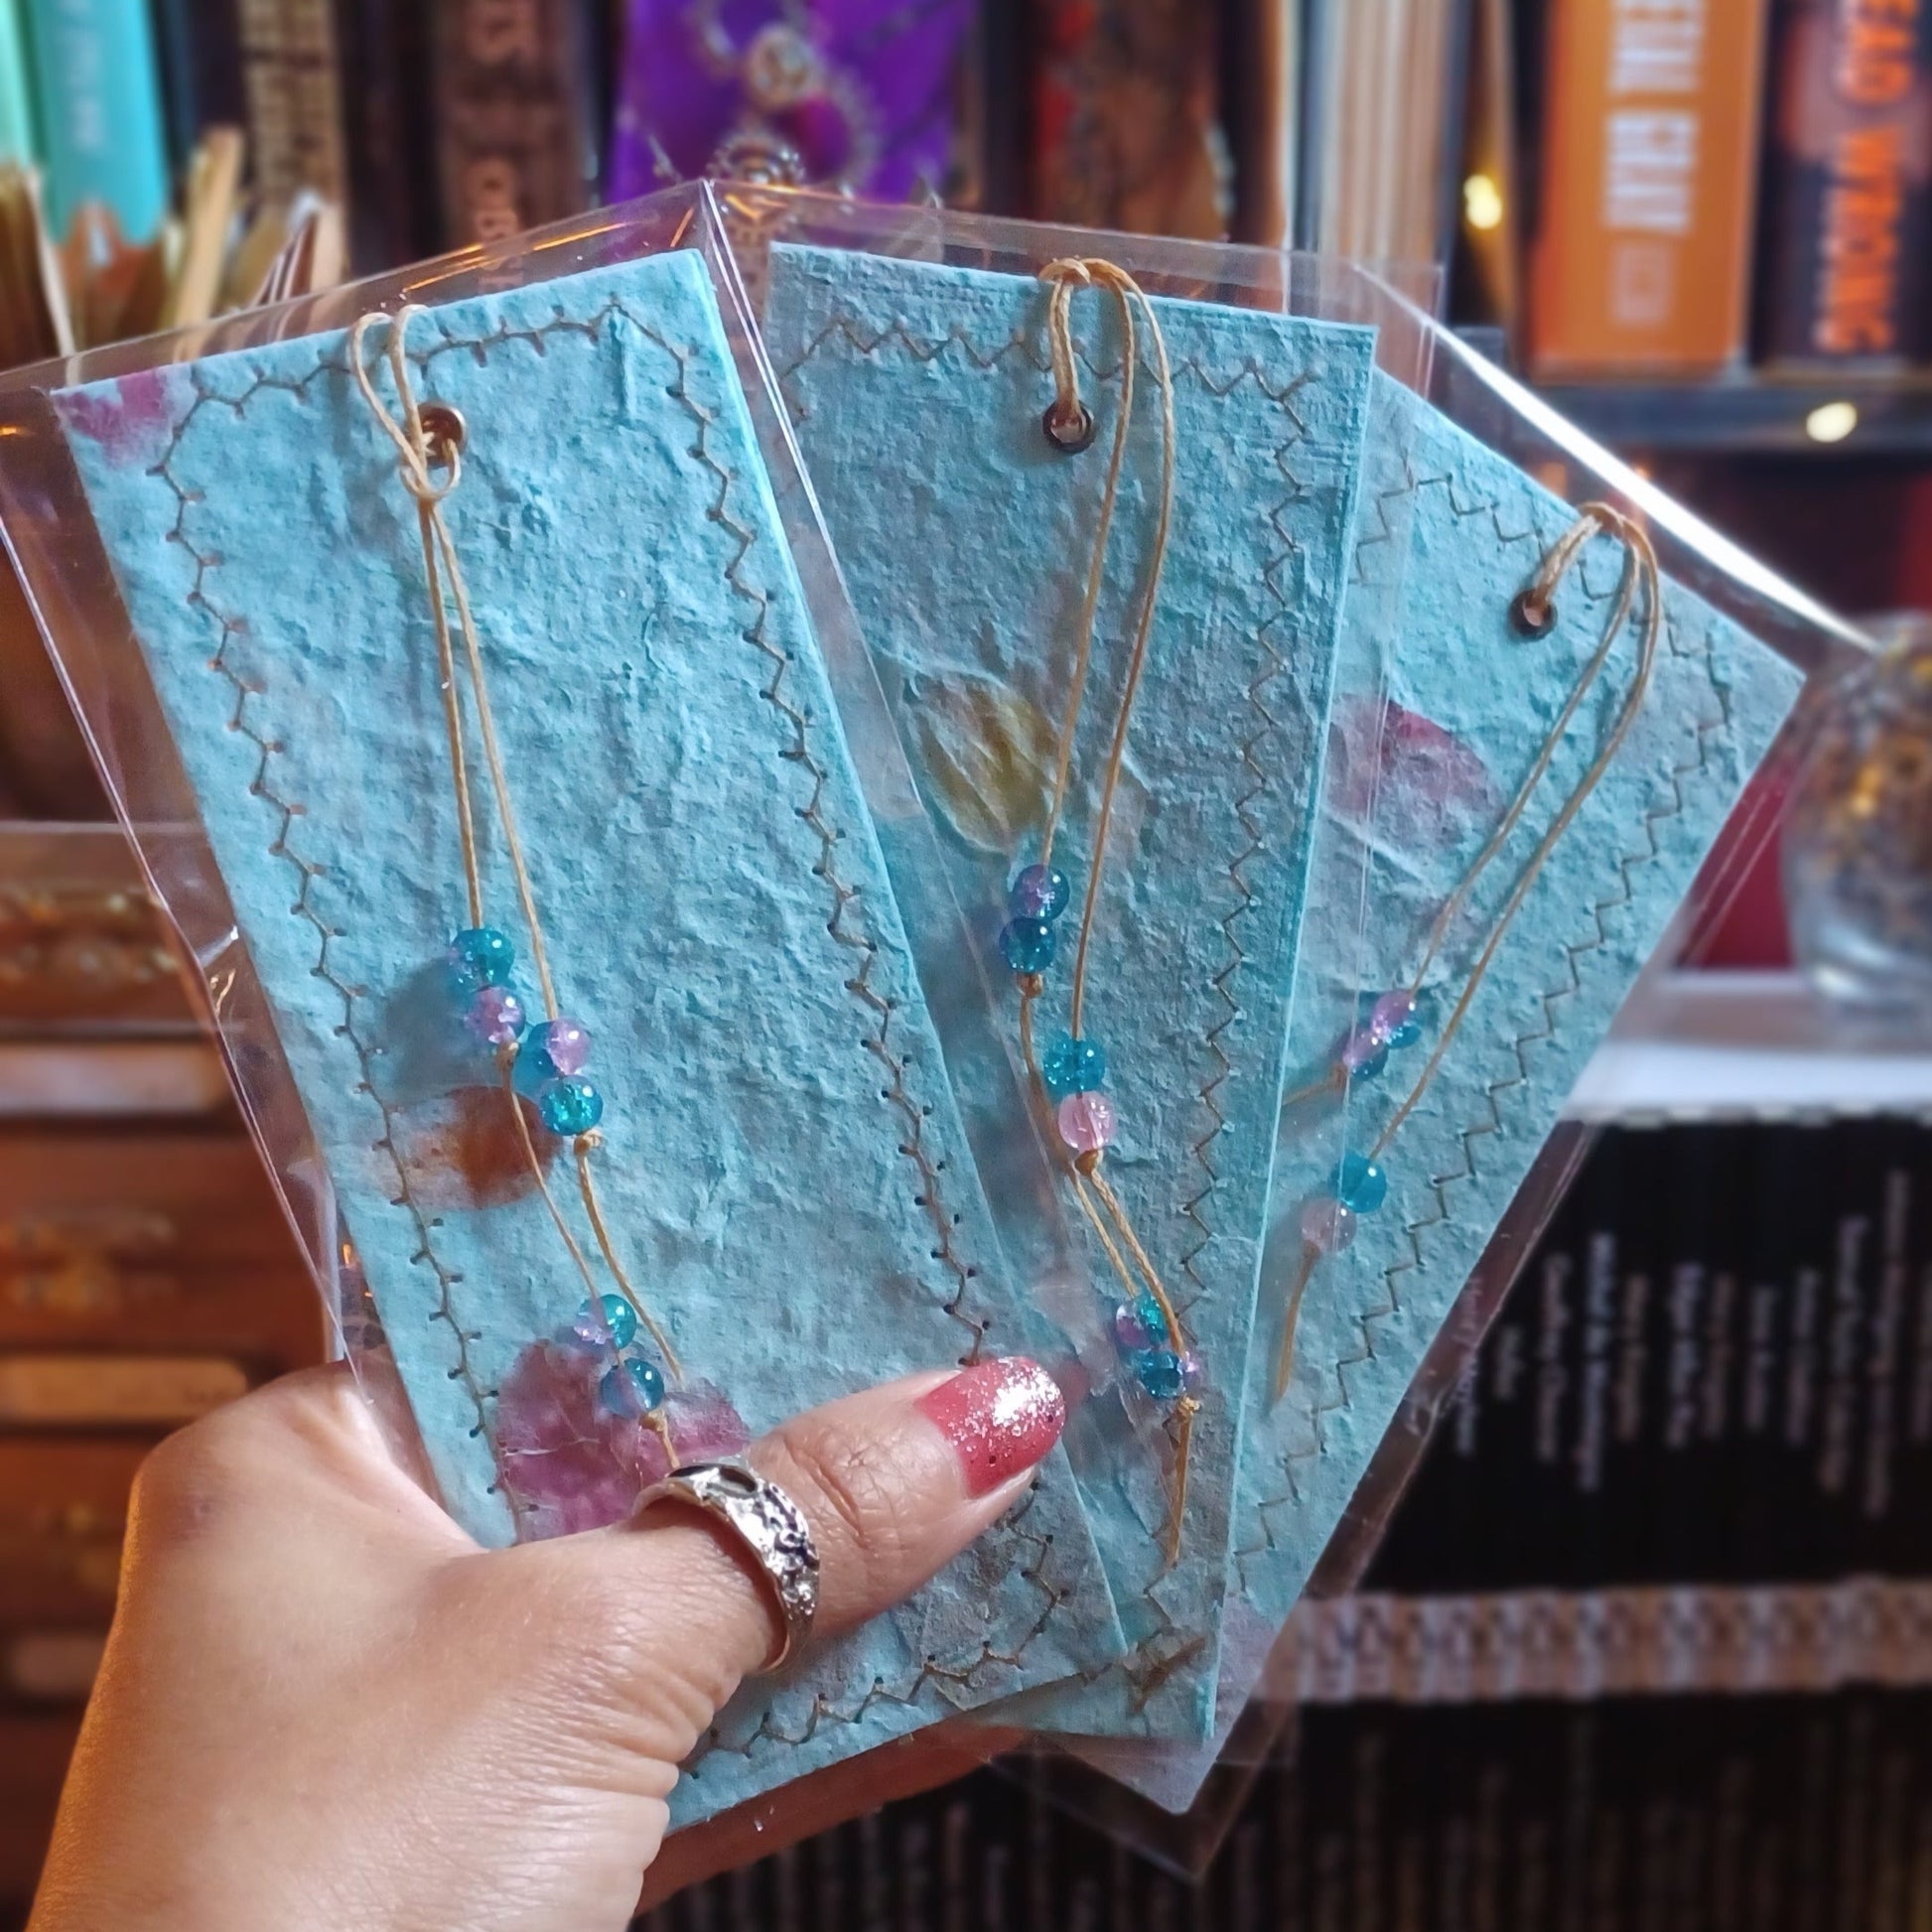 Blue - Handmade Paper Bookmarks with Stitched Edges, Pressed Flowers and Leaves